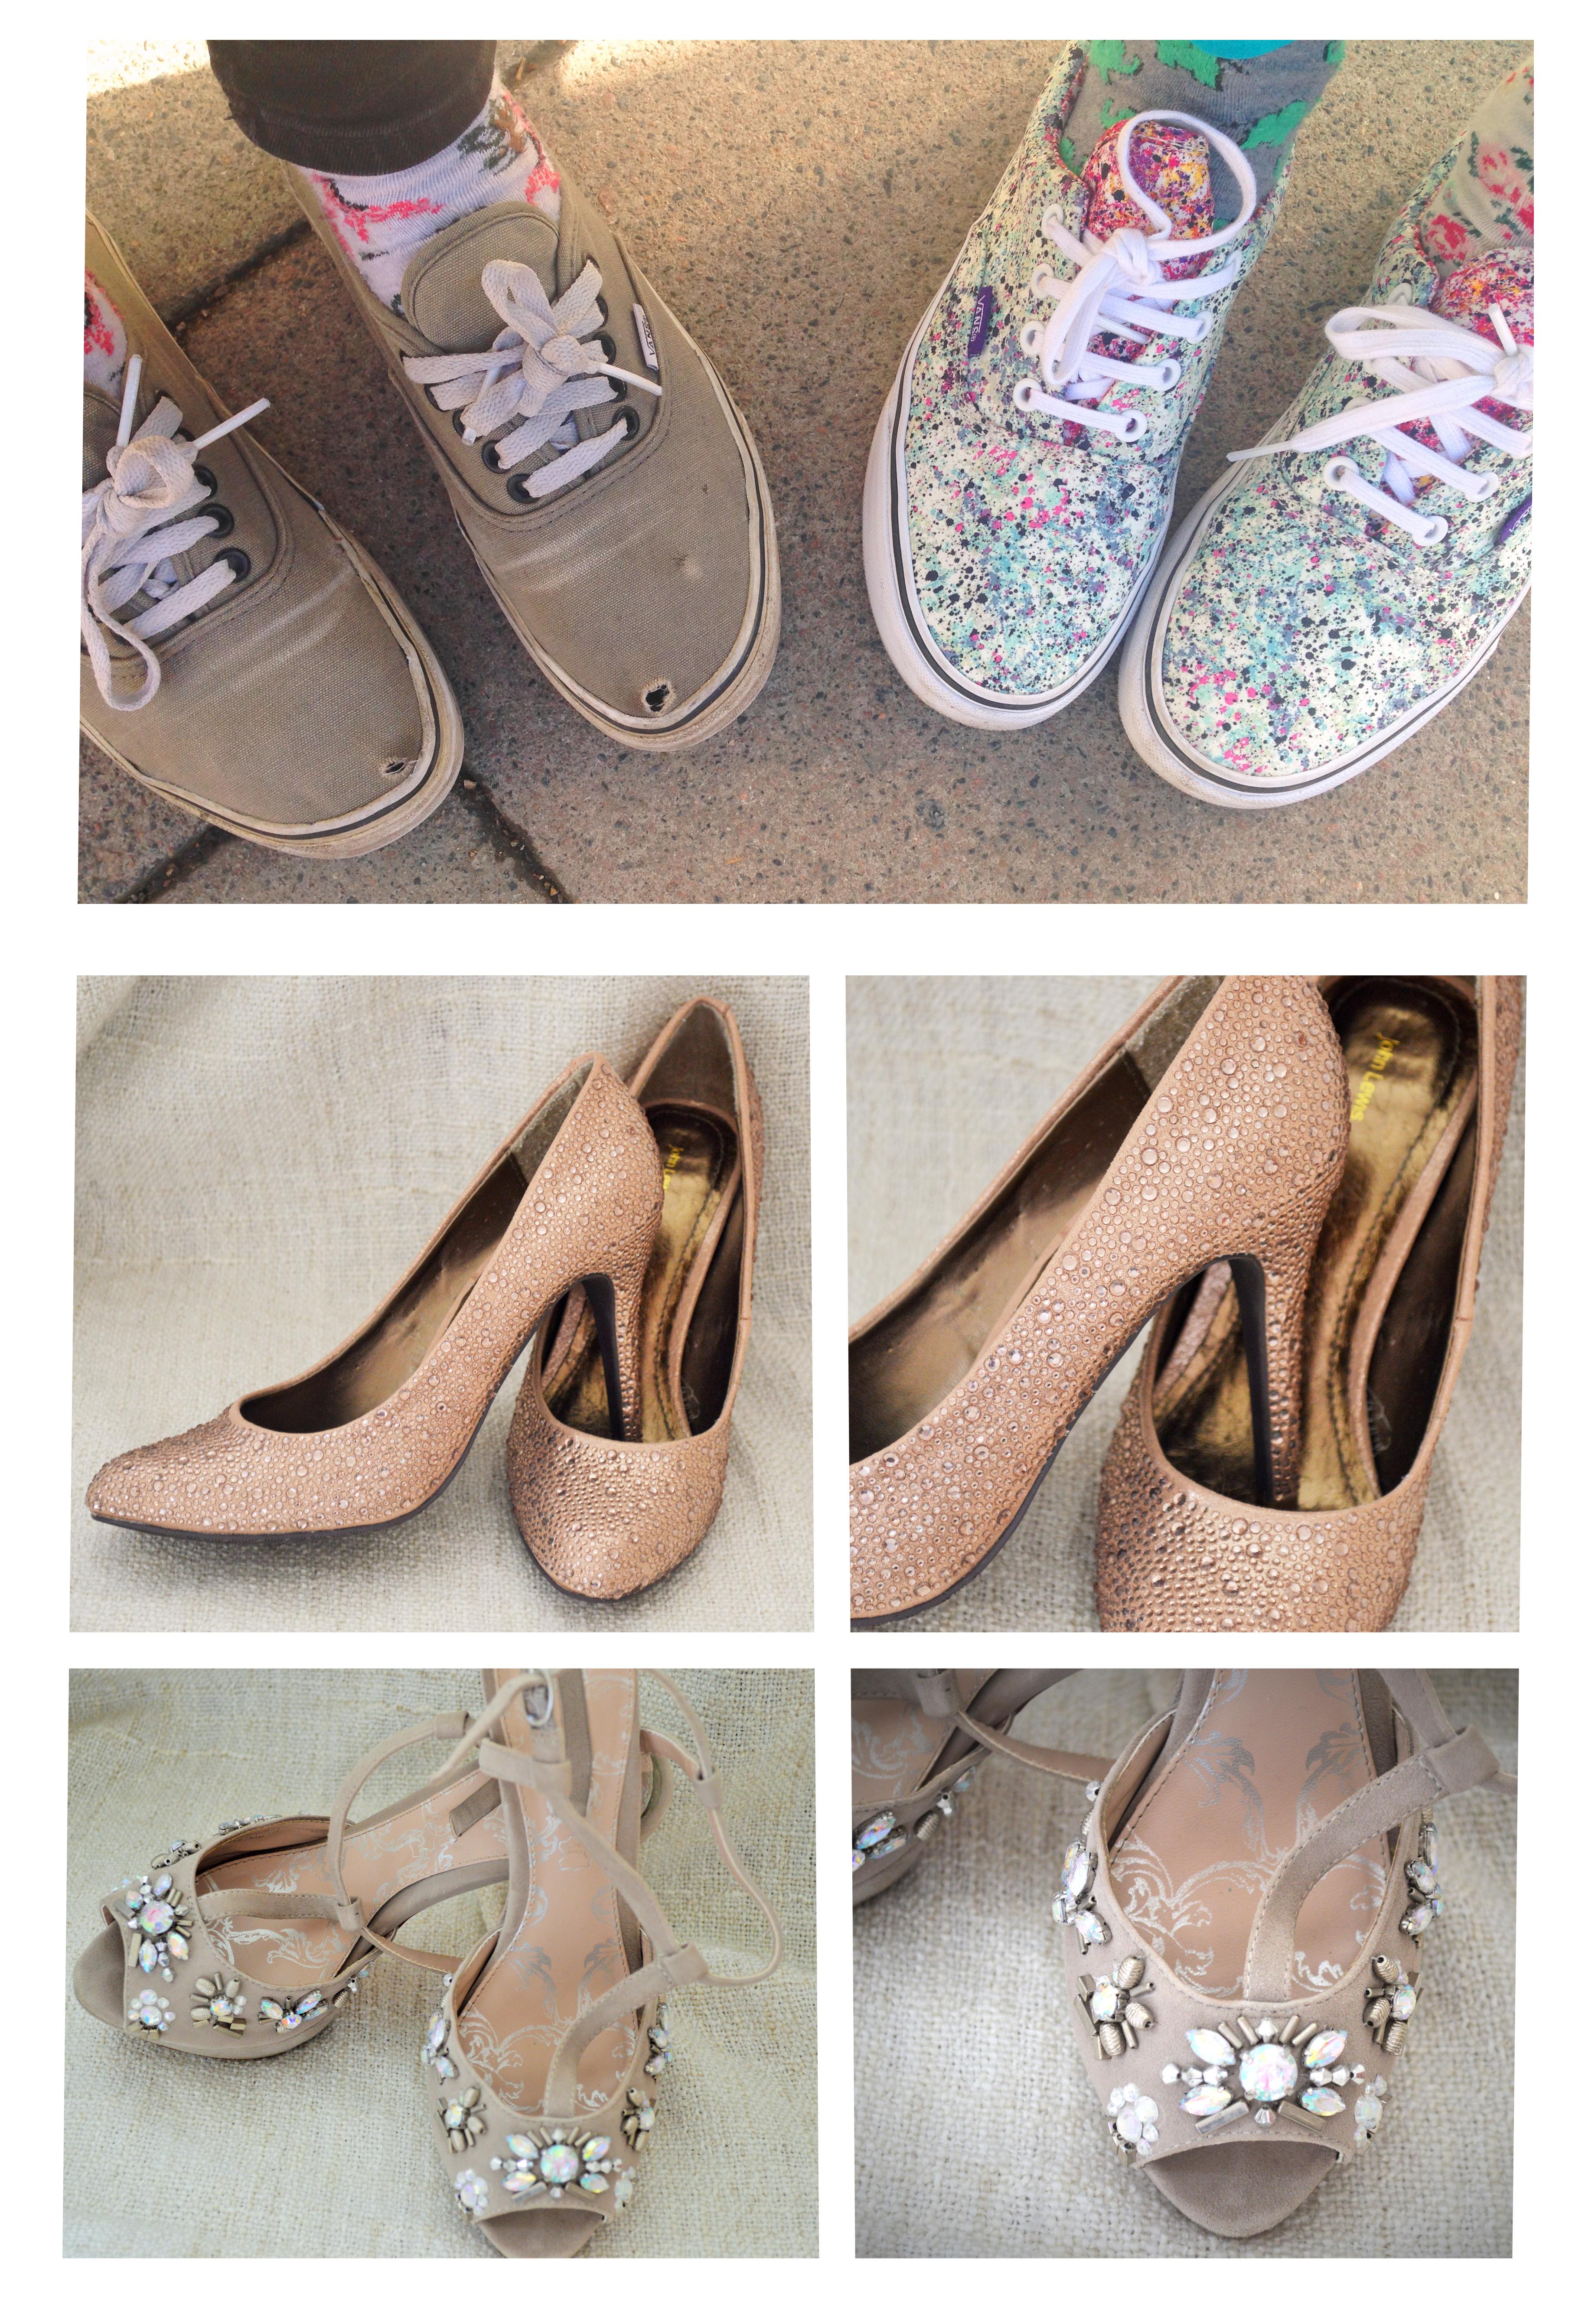 tuesday shoesday favourite shoes from glitter daze and the new craft society trainers